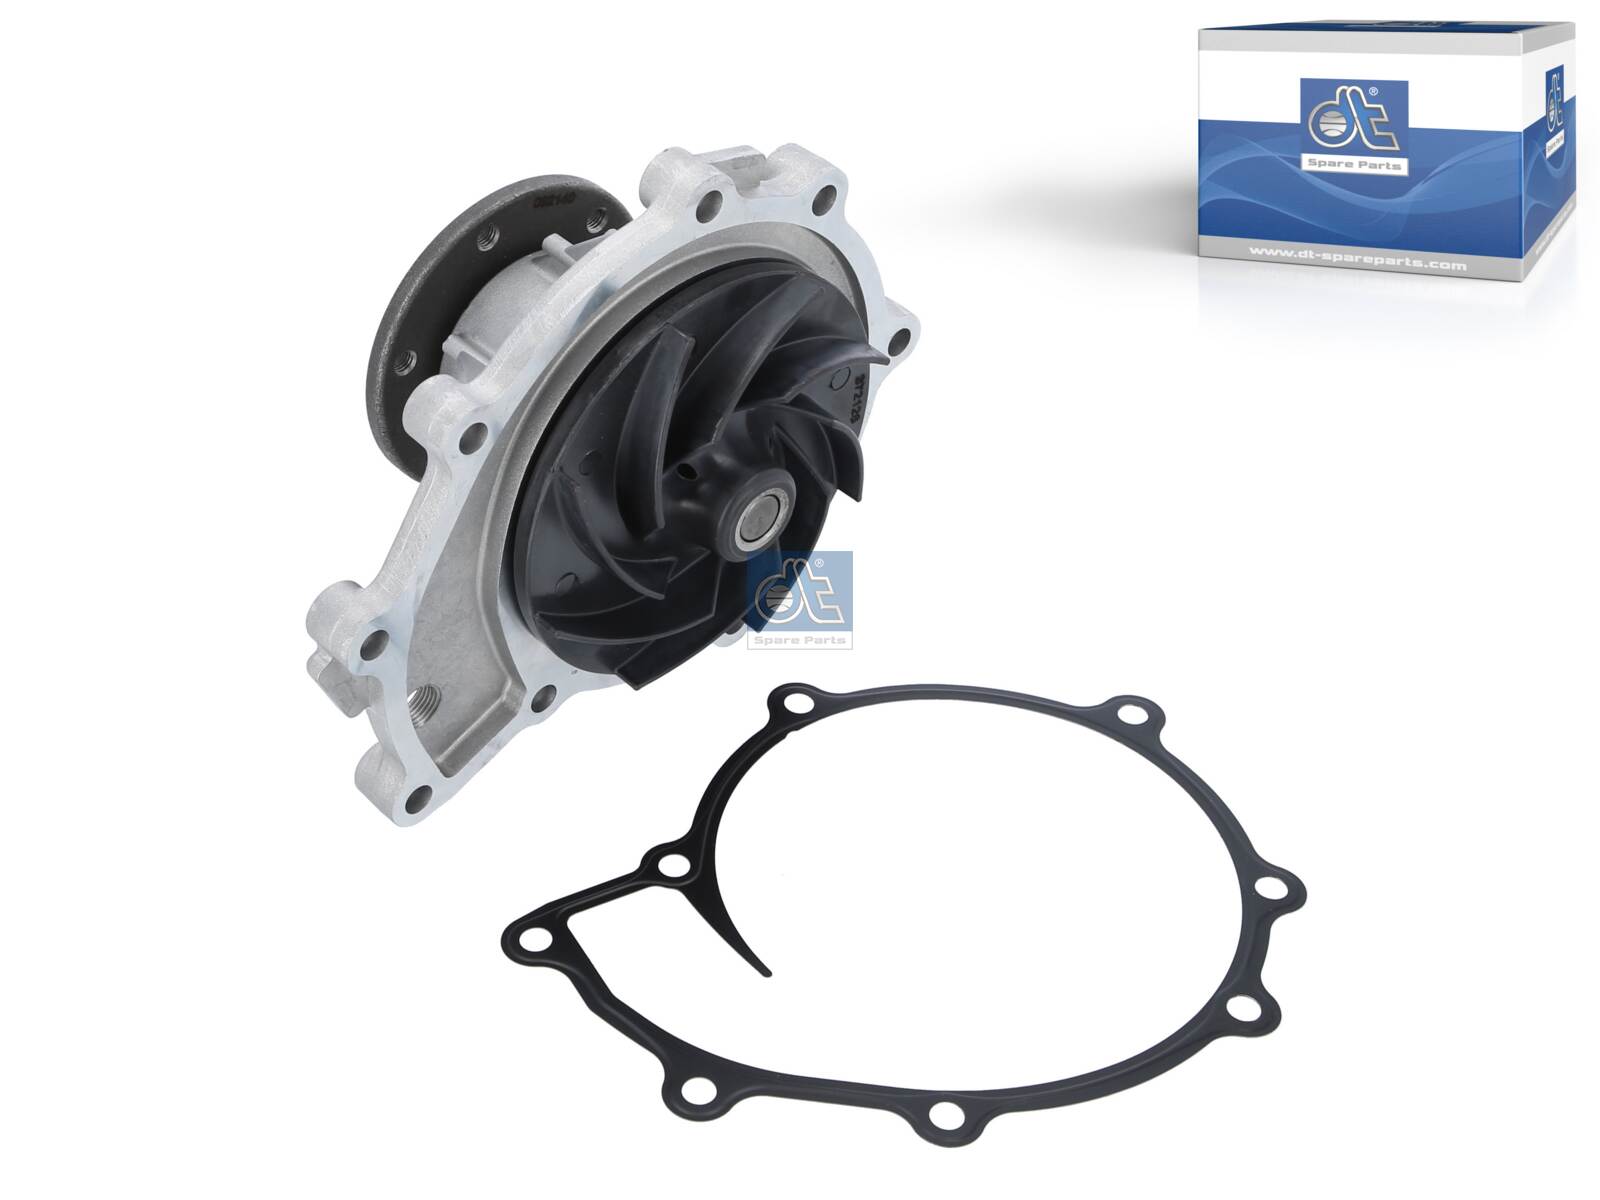 3.16024, Water Pump, engine cooling, DT Spare Parts, 51.06500.6651, 51.06500.6680, 51.06500.6700, 51.06500.7070, 51.06500.7079, 51.06500.9070, 51.06500.9079, 51.06500.9651, 51.06500.9680, 51.06500.9700, 51.06501.0337, 51.06501.3250, 022000083001, 023.238, 030.923-00A, 05.19.033, 08.120.0939.190, 12-342200004, 2201086, 24-1227, 33175, 343.415, 80766, 8MP376809-264, CP542000S, DP255, VKPC7019, 023.238-01, 2201113, 51.